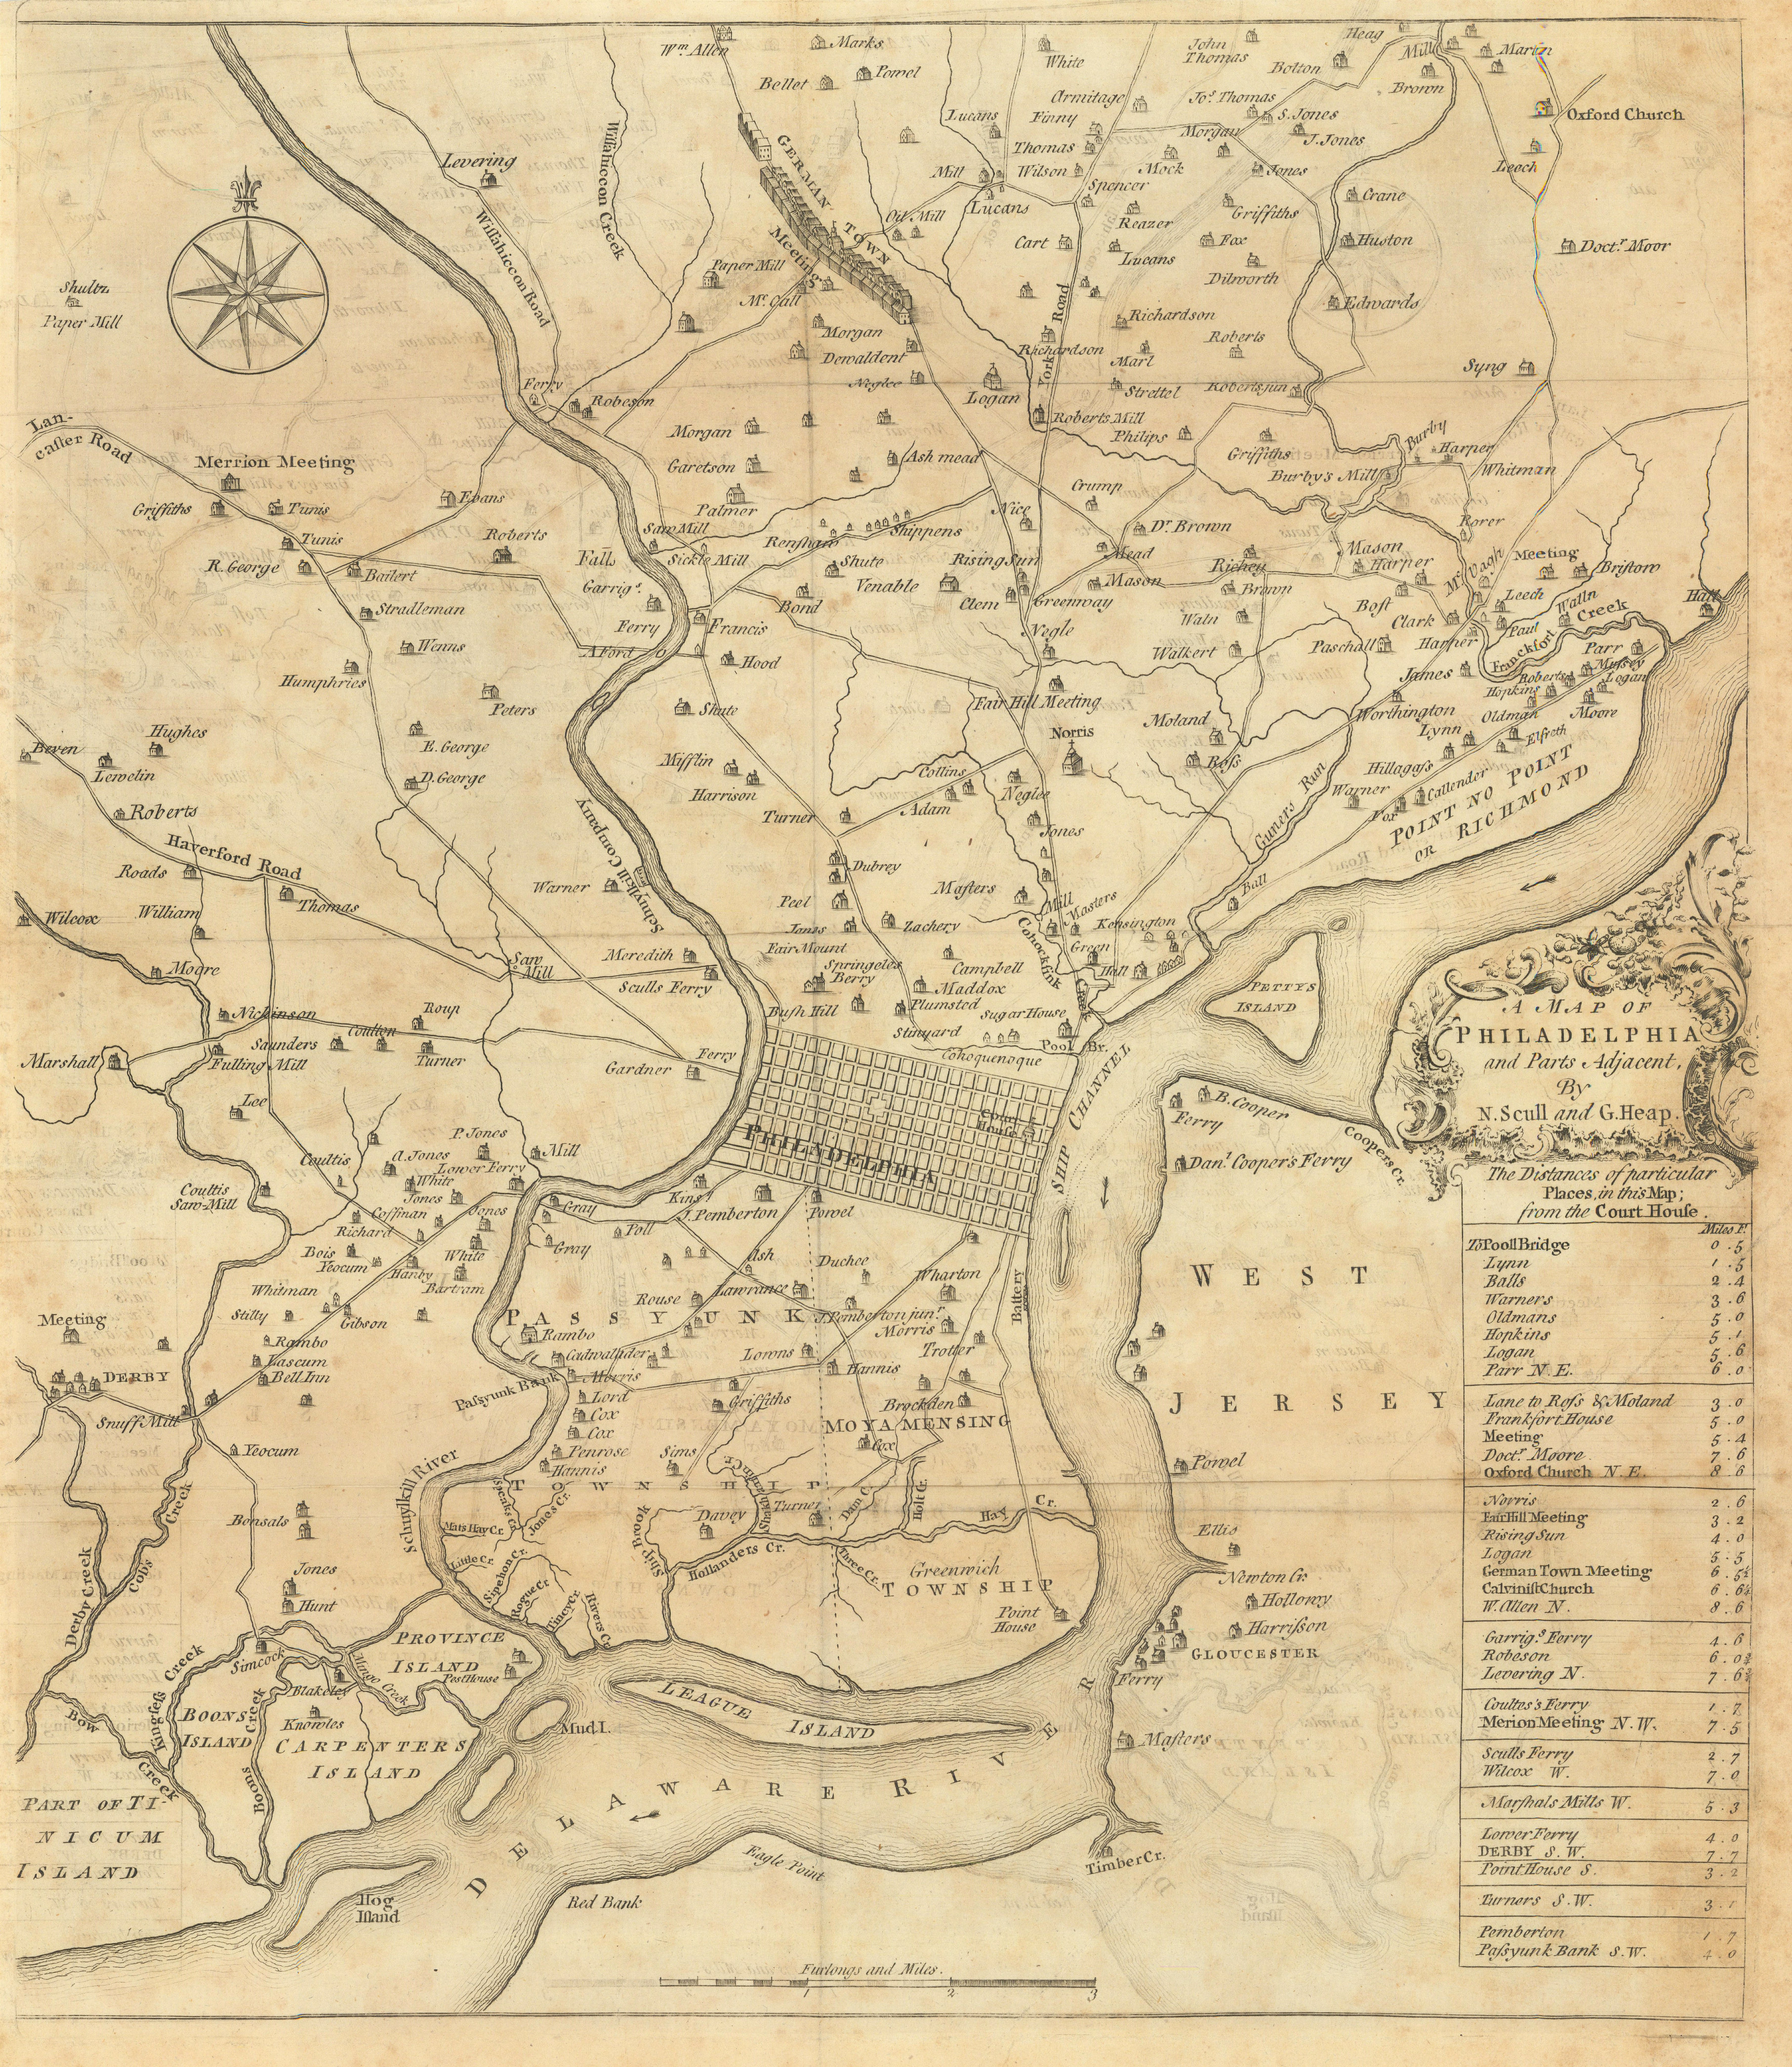 A map of Philadelphia and parts adjacent. Pennsylvania. SCULL & HEAP 1753